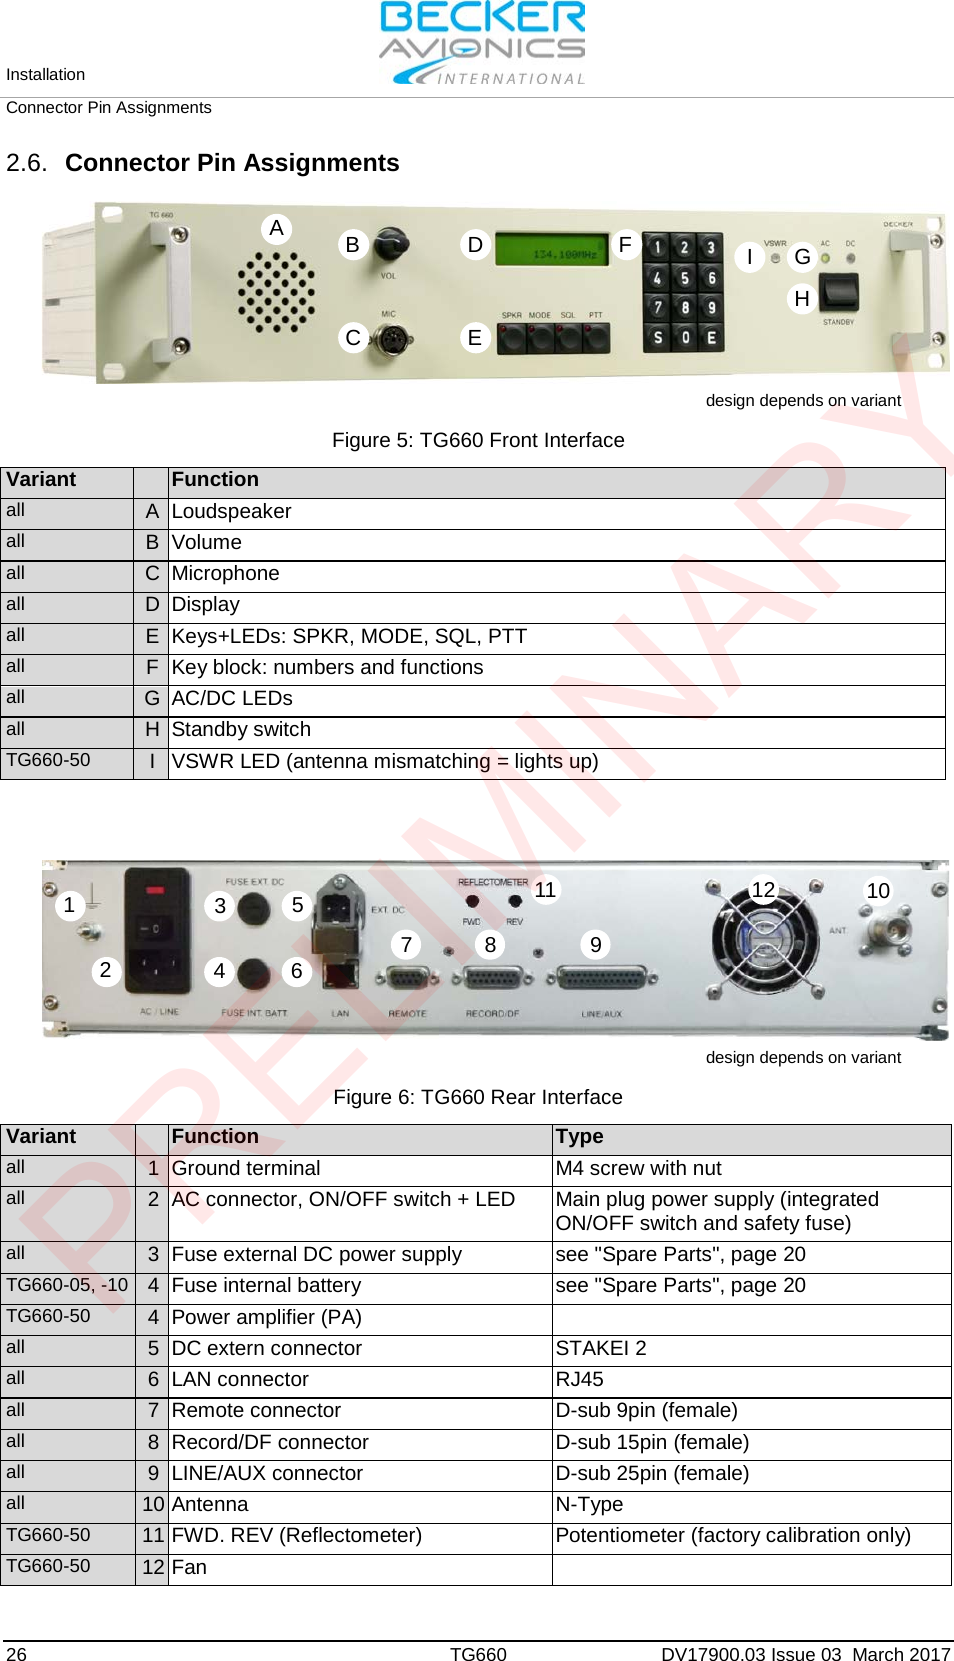 Installation Connector Pin Assignments 26 TG660 DV17900.03 Issue 03  March 2017 2.6. Connector Pin Assignments design depends on variant Figure 5: TG660 Front Interface Variant Function all A Loudspeaker all B Volume all C Microphone all D Display all E Keys+LEDs: SPKR, MODE, SQL, PTT all F Key block: numbers and functions all G AC/DC LEDs all H Standby switch TG660-50 I VSWR LED (antenna mismatching = lights up) design depends on variant Figure 6: TG660 Rear Interface Variant Function Type all 1 Ground terminal M4 screw with nut all 2 AC connector, ON/OFF switch + LED Main plug power supply (integrated ON/OFF switch and safety fuse) all 3 Fuse external DC power supply see &quot;Spare Parts&quot;, page 20 TG660-05, -10 4 Fuse internal battery see &quot;Spare Parts&quot;, page 20 TG660-50 4 Power amplifier (PA) all 5 DC extern connector STAKEI 2 all 6 LAN connector RJ45 all 7 Remote connector D-sub 9pin (female)all 8 Record/DF connector D-sub 15pin (female)all 9 LINE/AUX connector D-sub 25pin (female)all 10 Antenna N-TypeTG660-50 11 FWD. REV (Reflectometer) Potentiometer (factory calibration only) TG660-50 12 Fan ABCDEFHGI1234567 8 91011 12PRELIMINARY